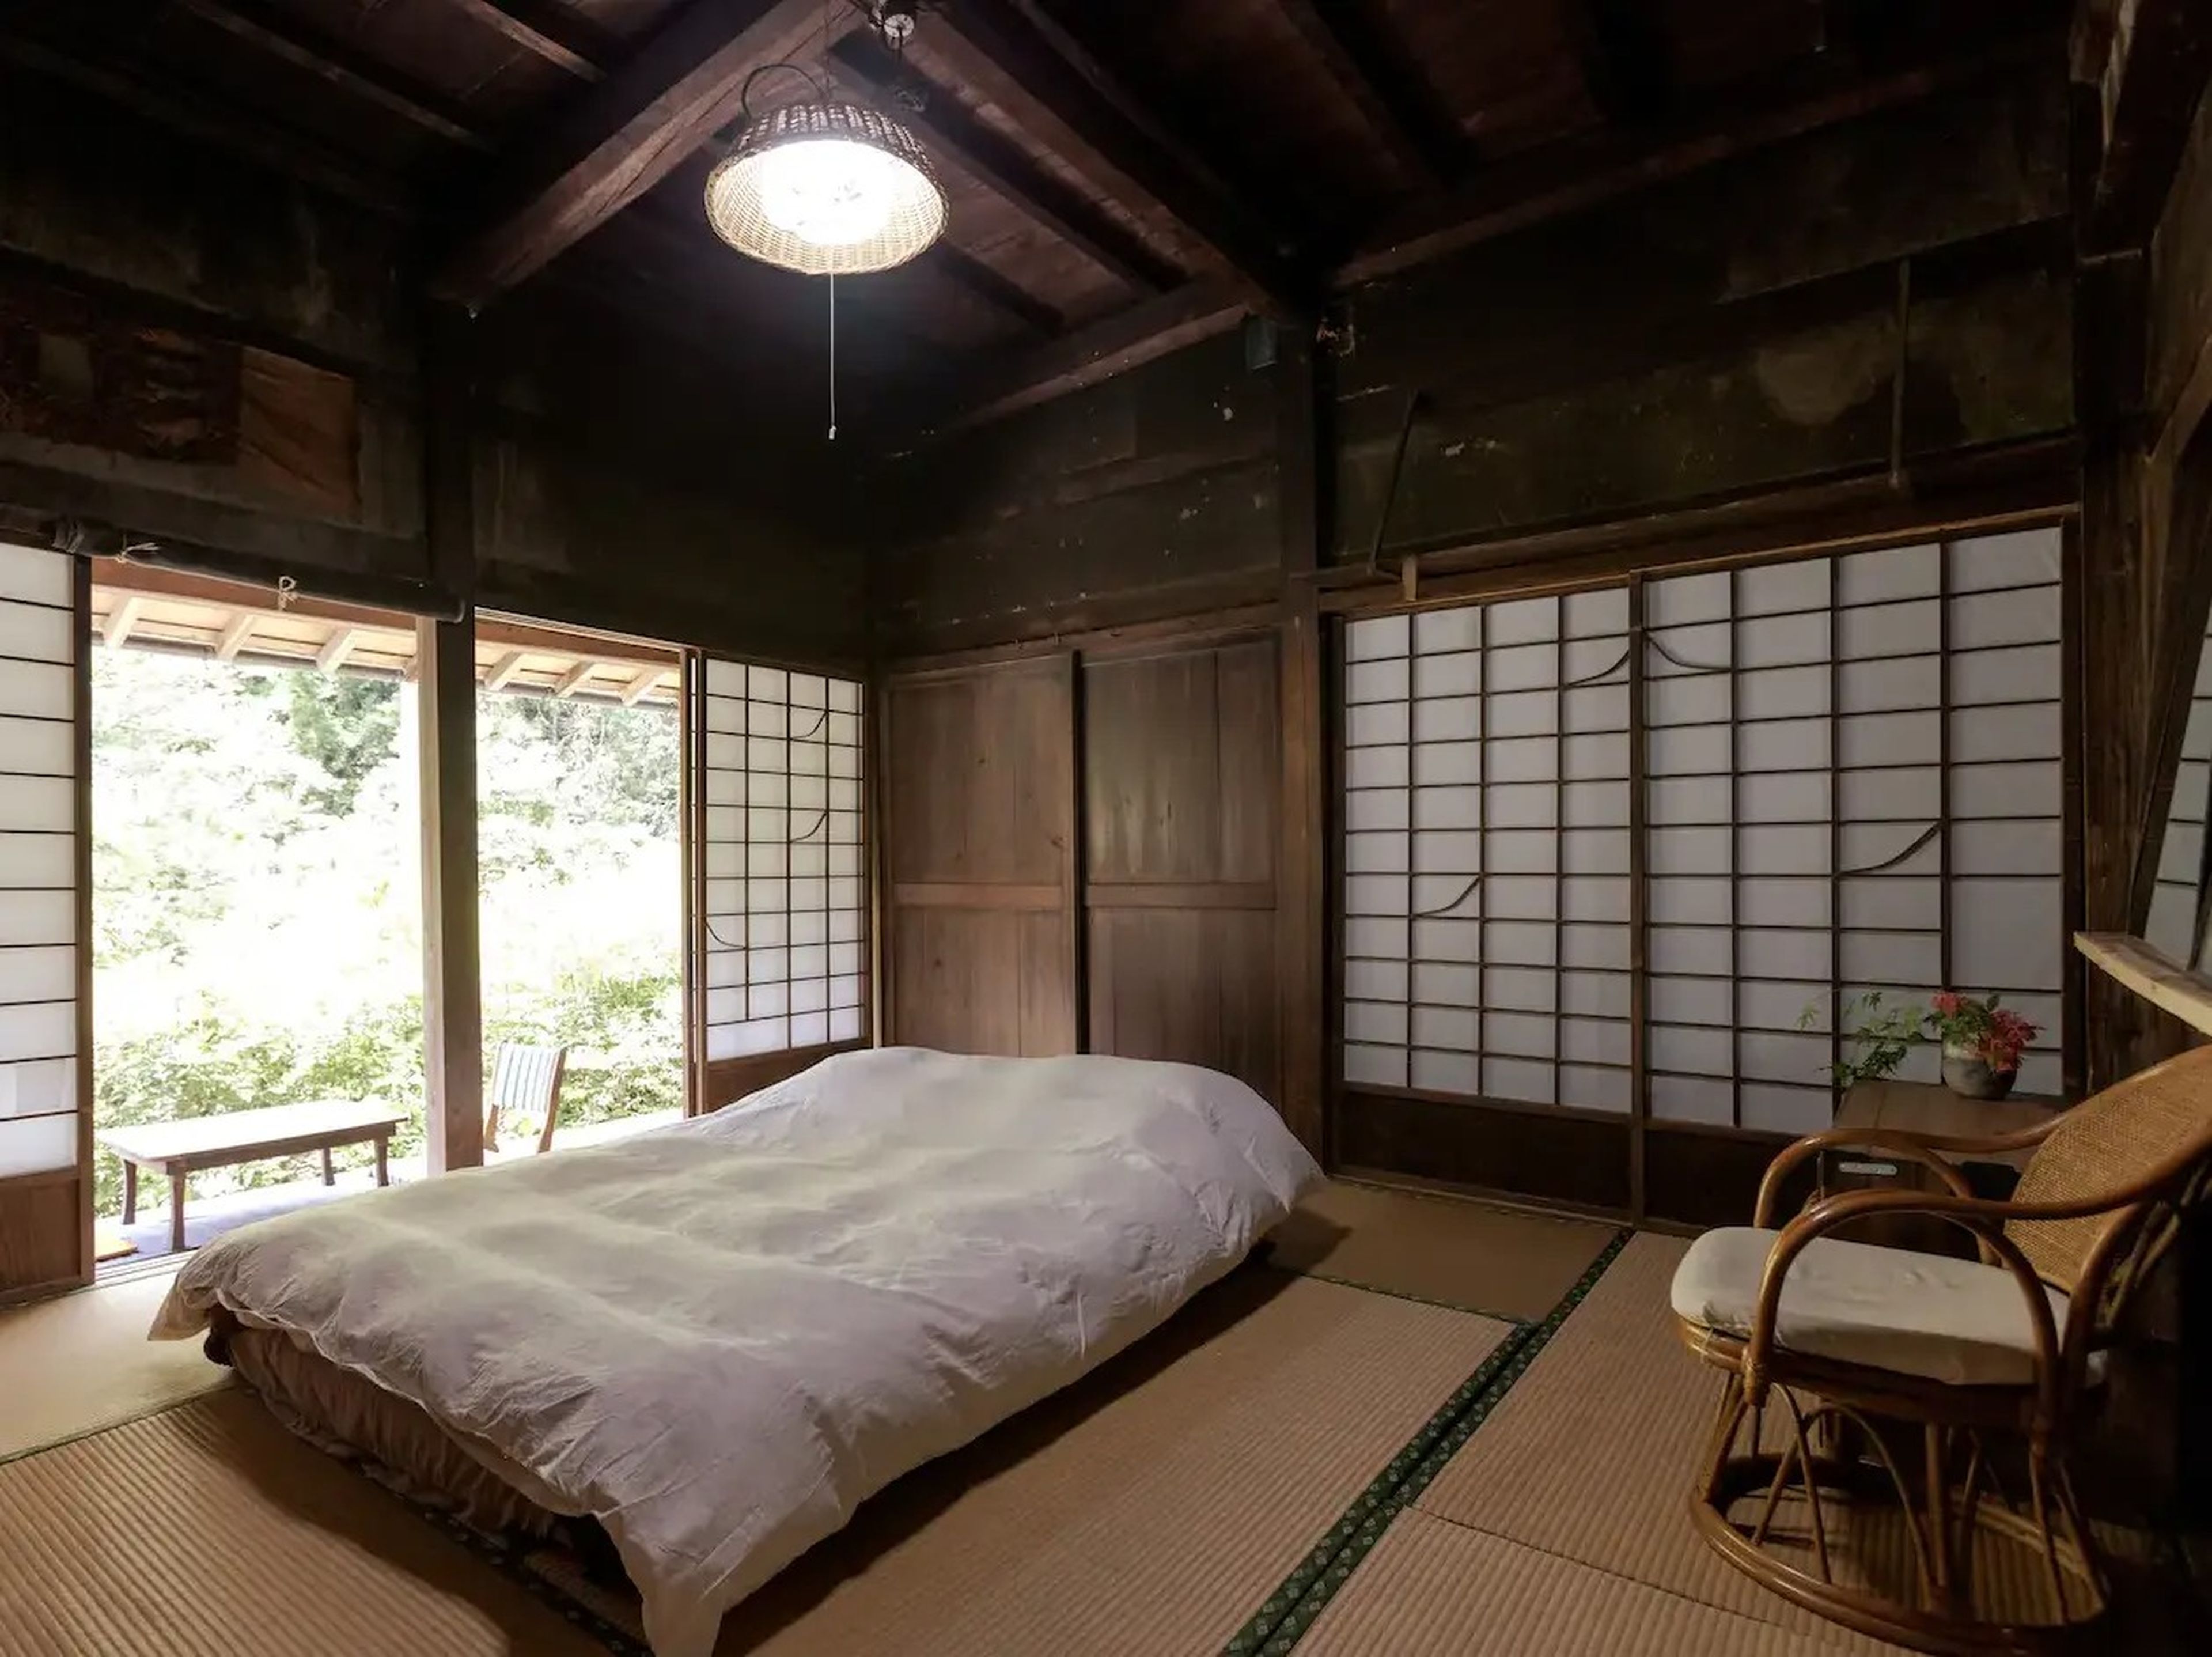 One of the bedrooms in the ryokan.